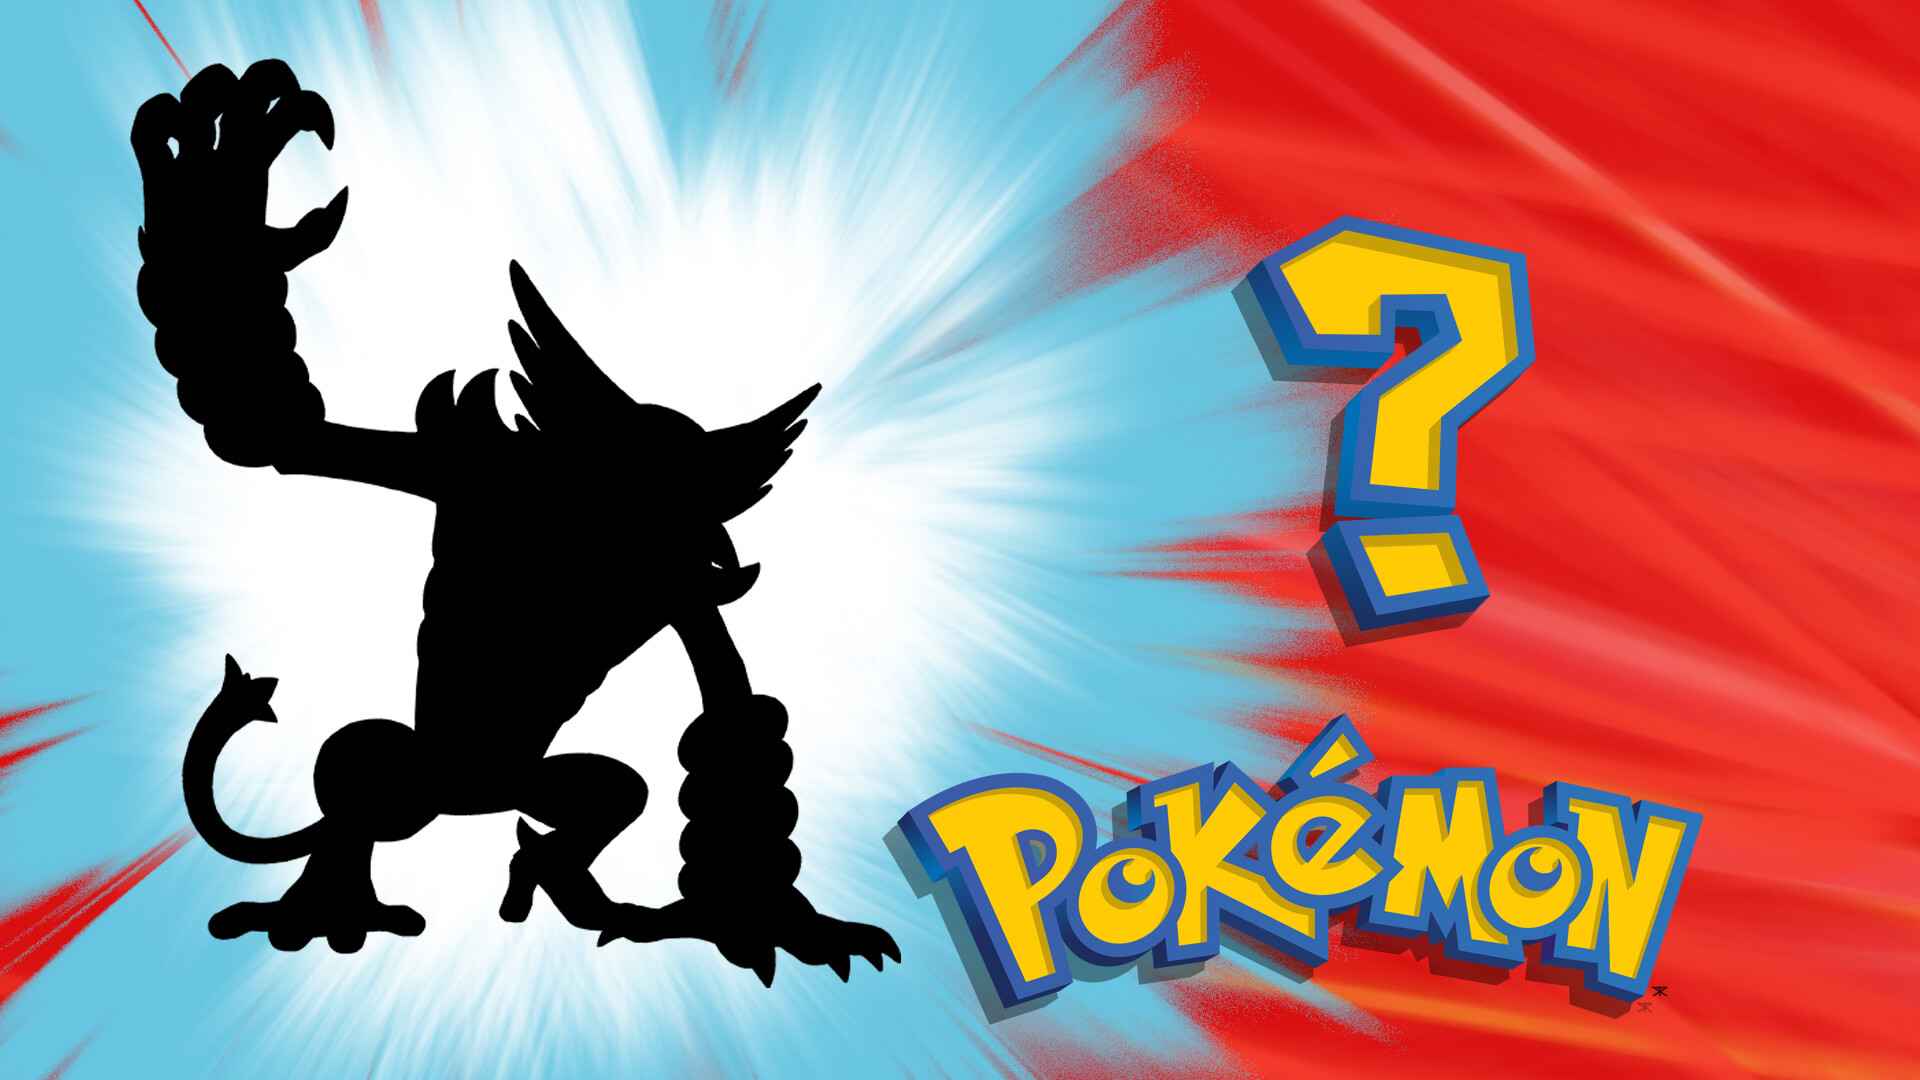 Who's that Mythical Pokemon